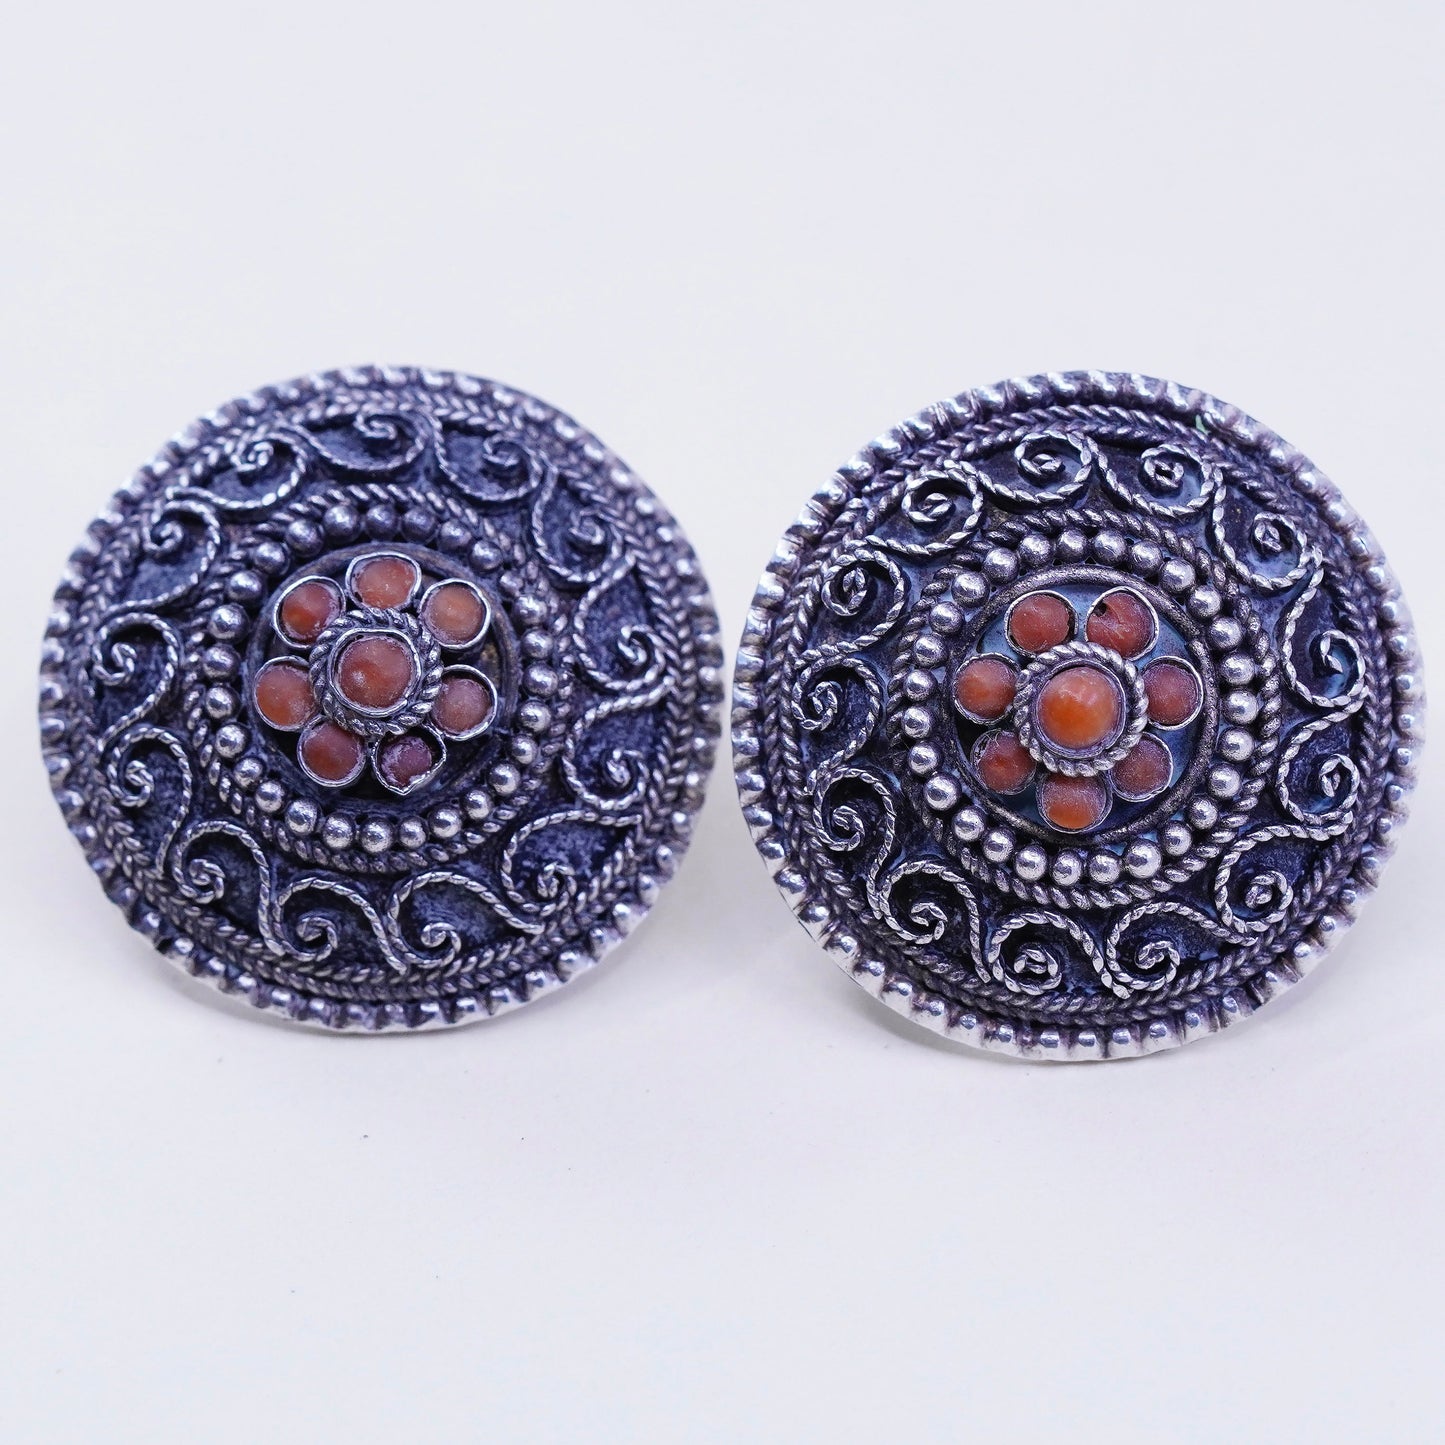 vtg sterling silver handmade earrings, 925 filigree circle studs with red coral